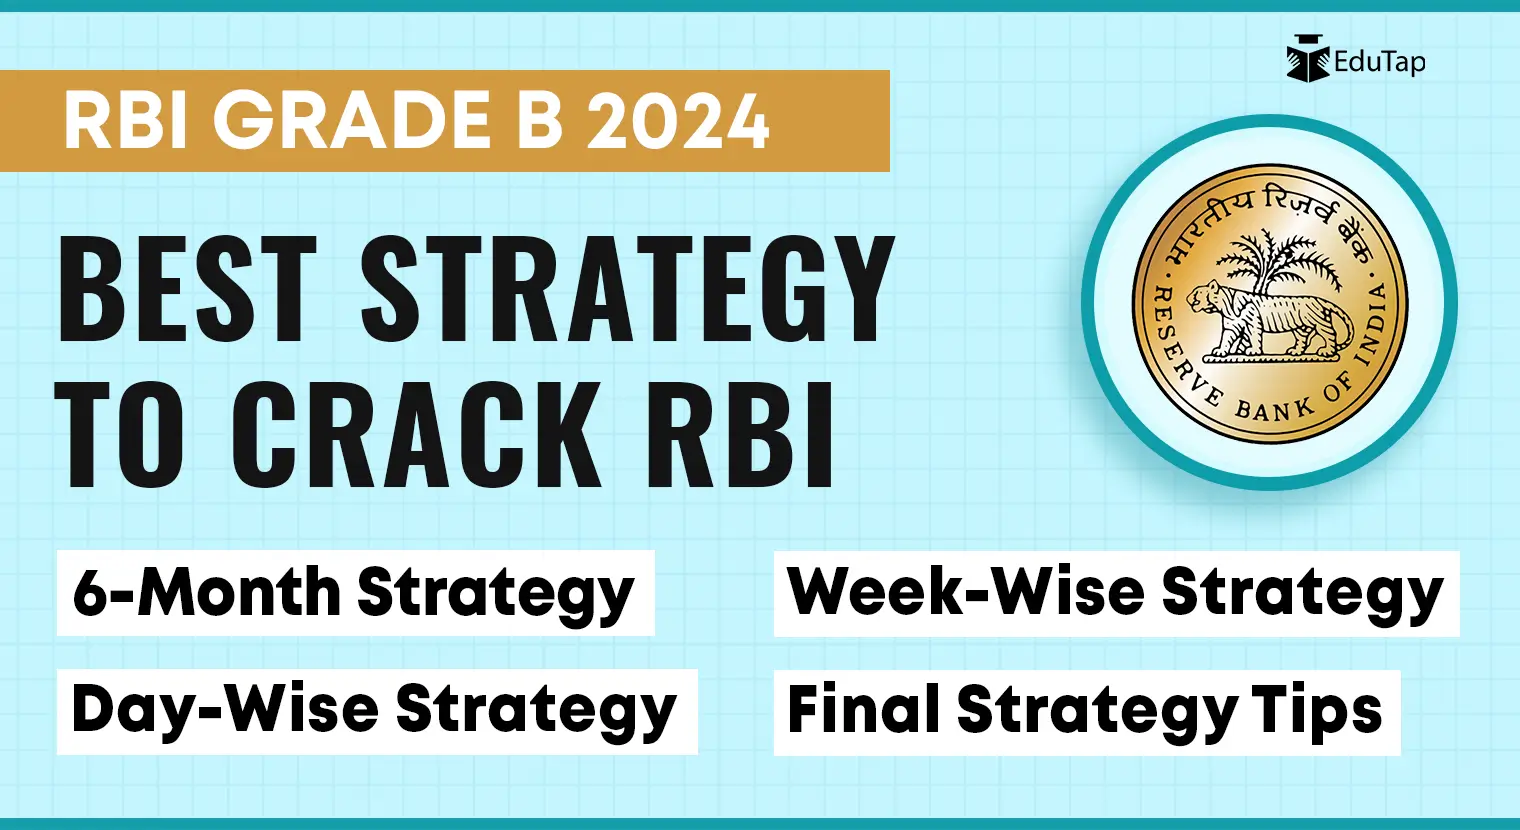 Best Strategy to Crack the RBI Grade B Exam